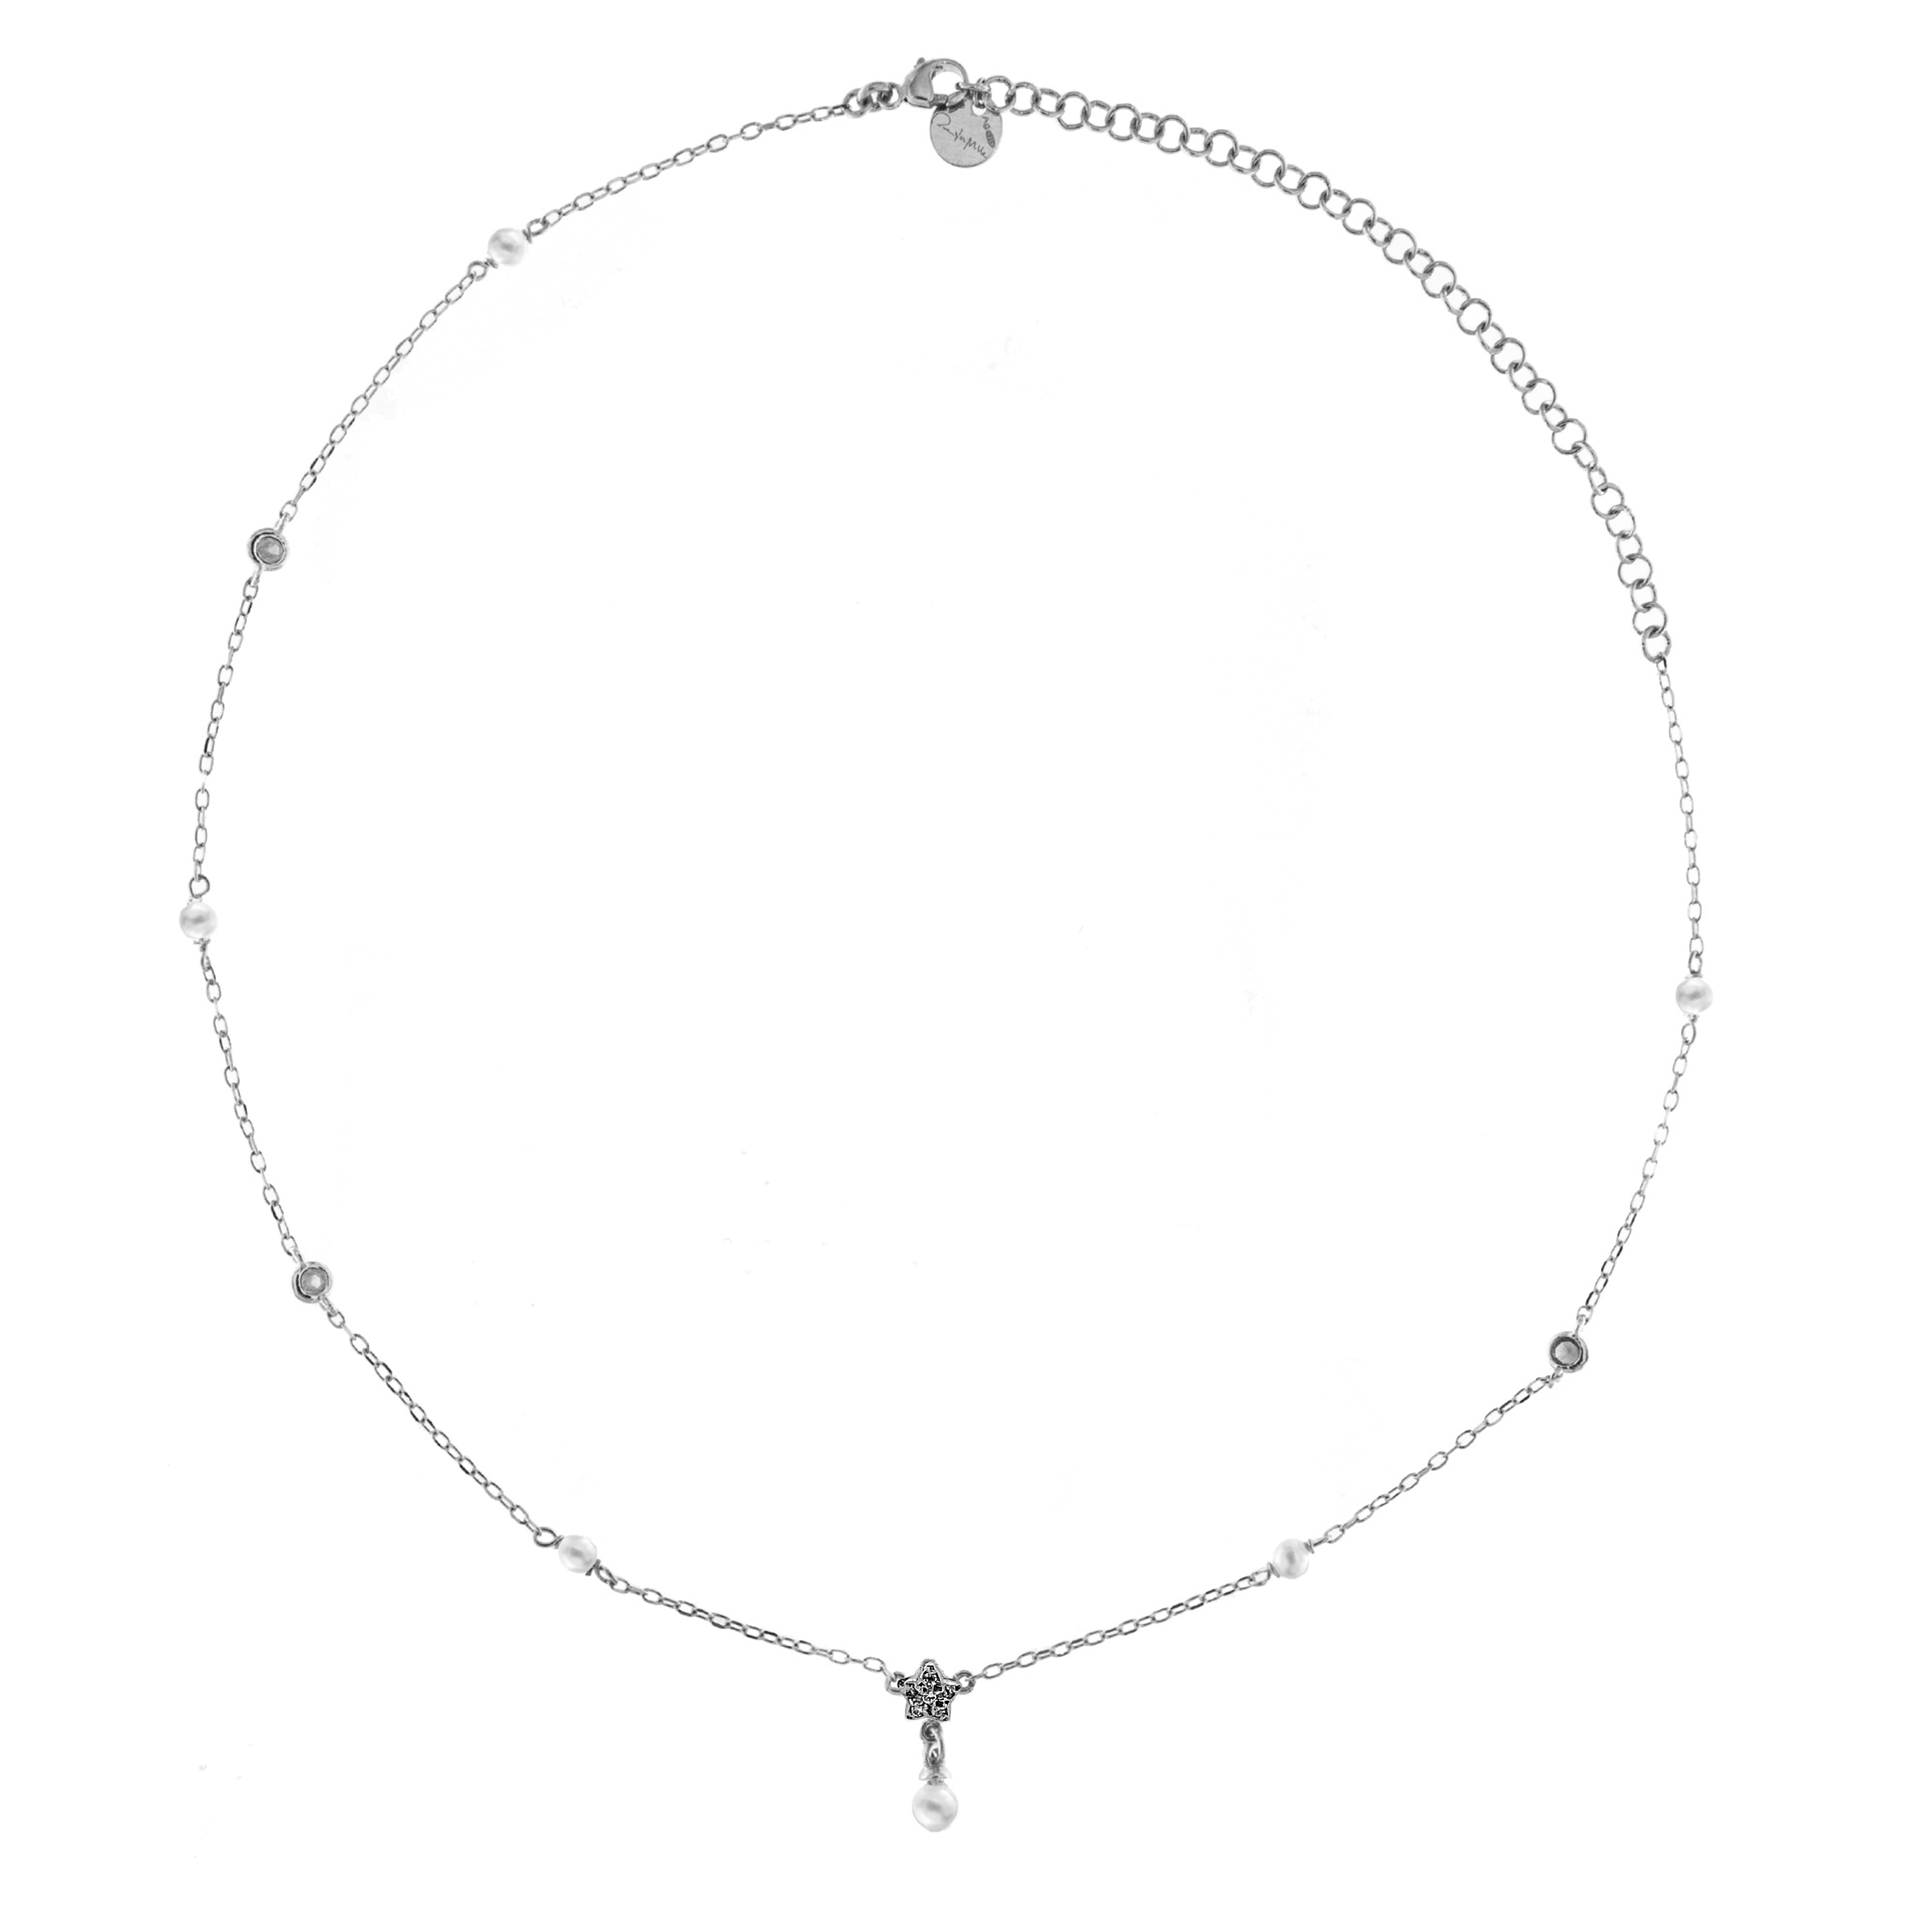 NECKLACE PEARL STAR PENDANT WITH ALTERNATED CHAIN - GALACTICA ICE